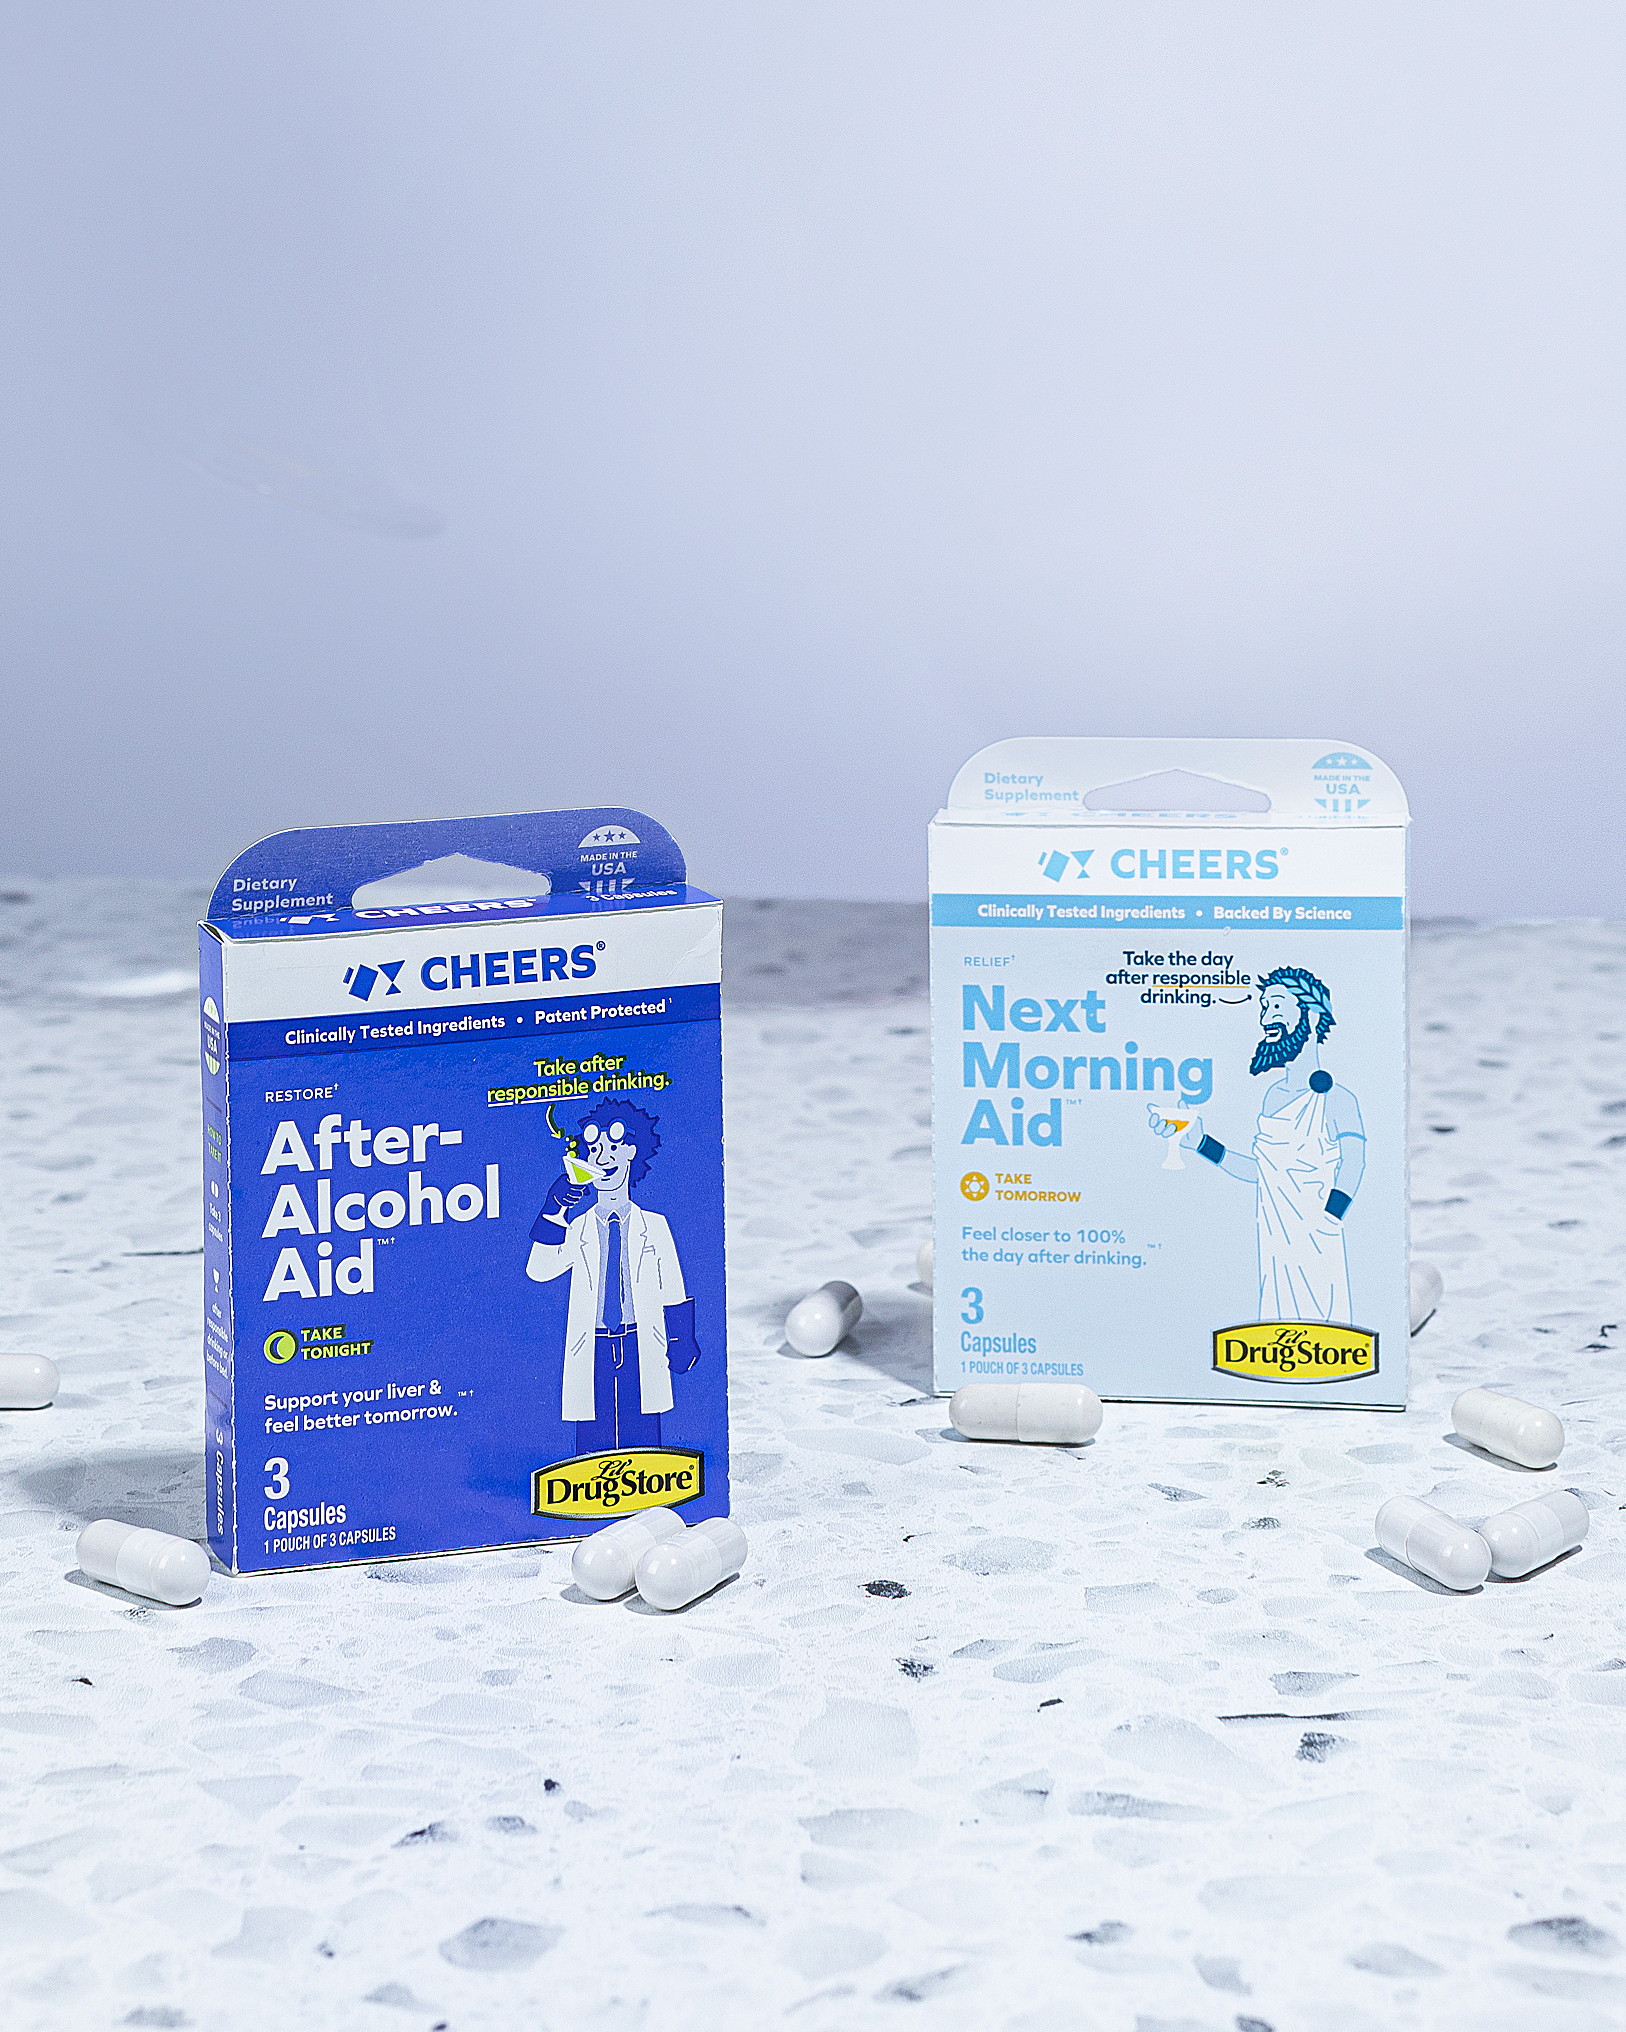 Cheers, #1 Alcohol-Related Health & Wellness Brand, Now Available in Convenience, Travel and Hospitality